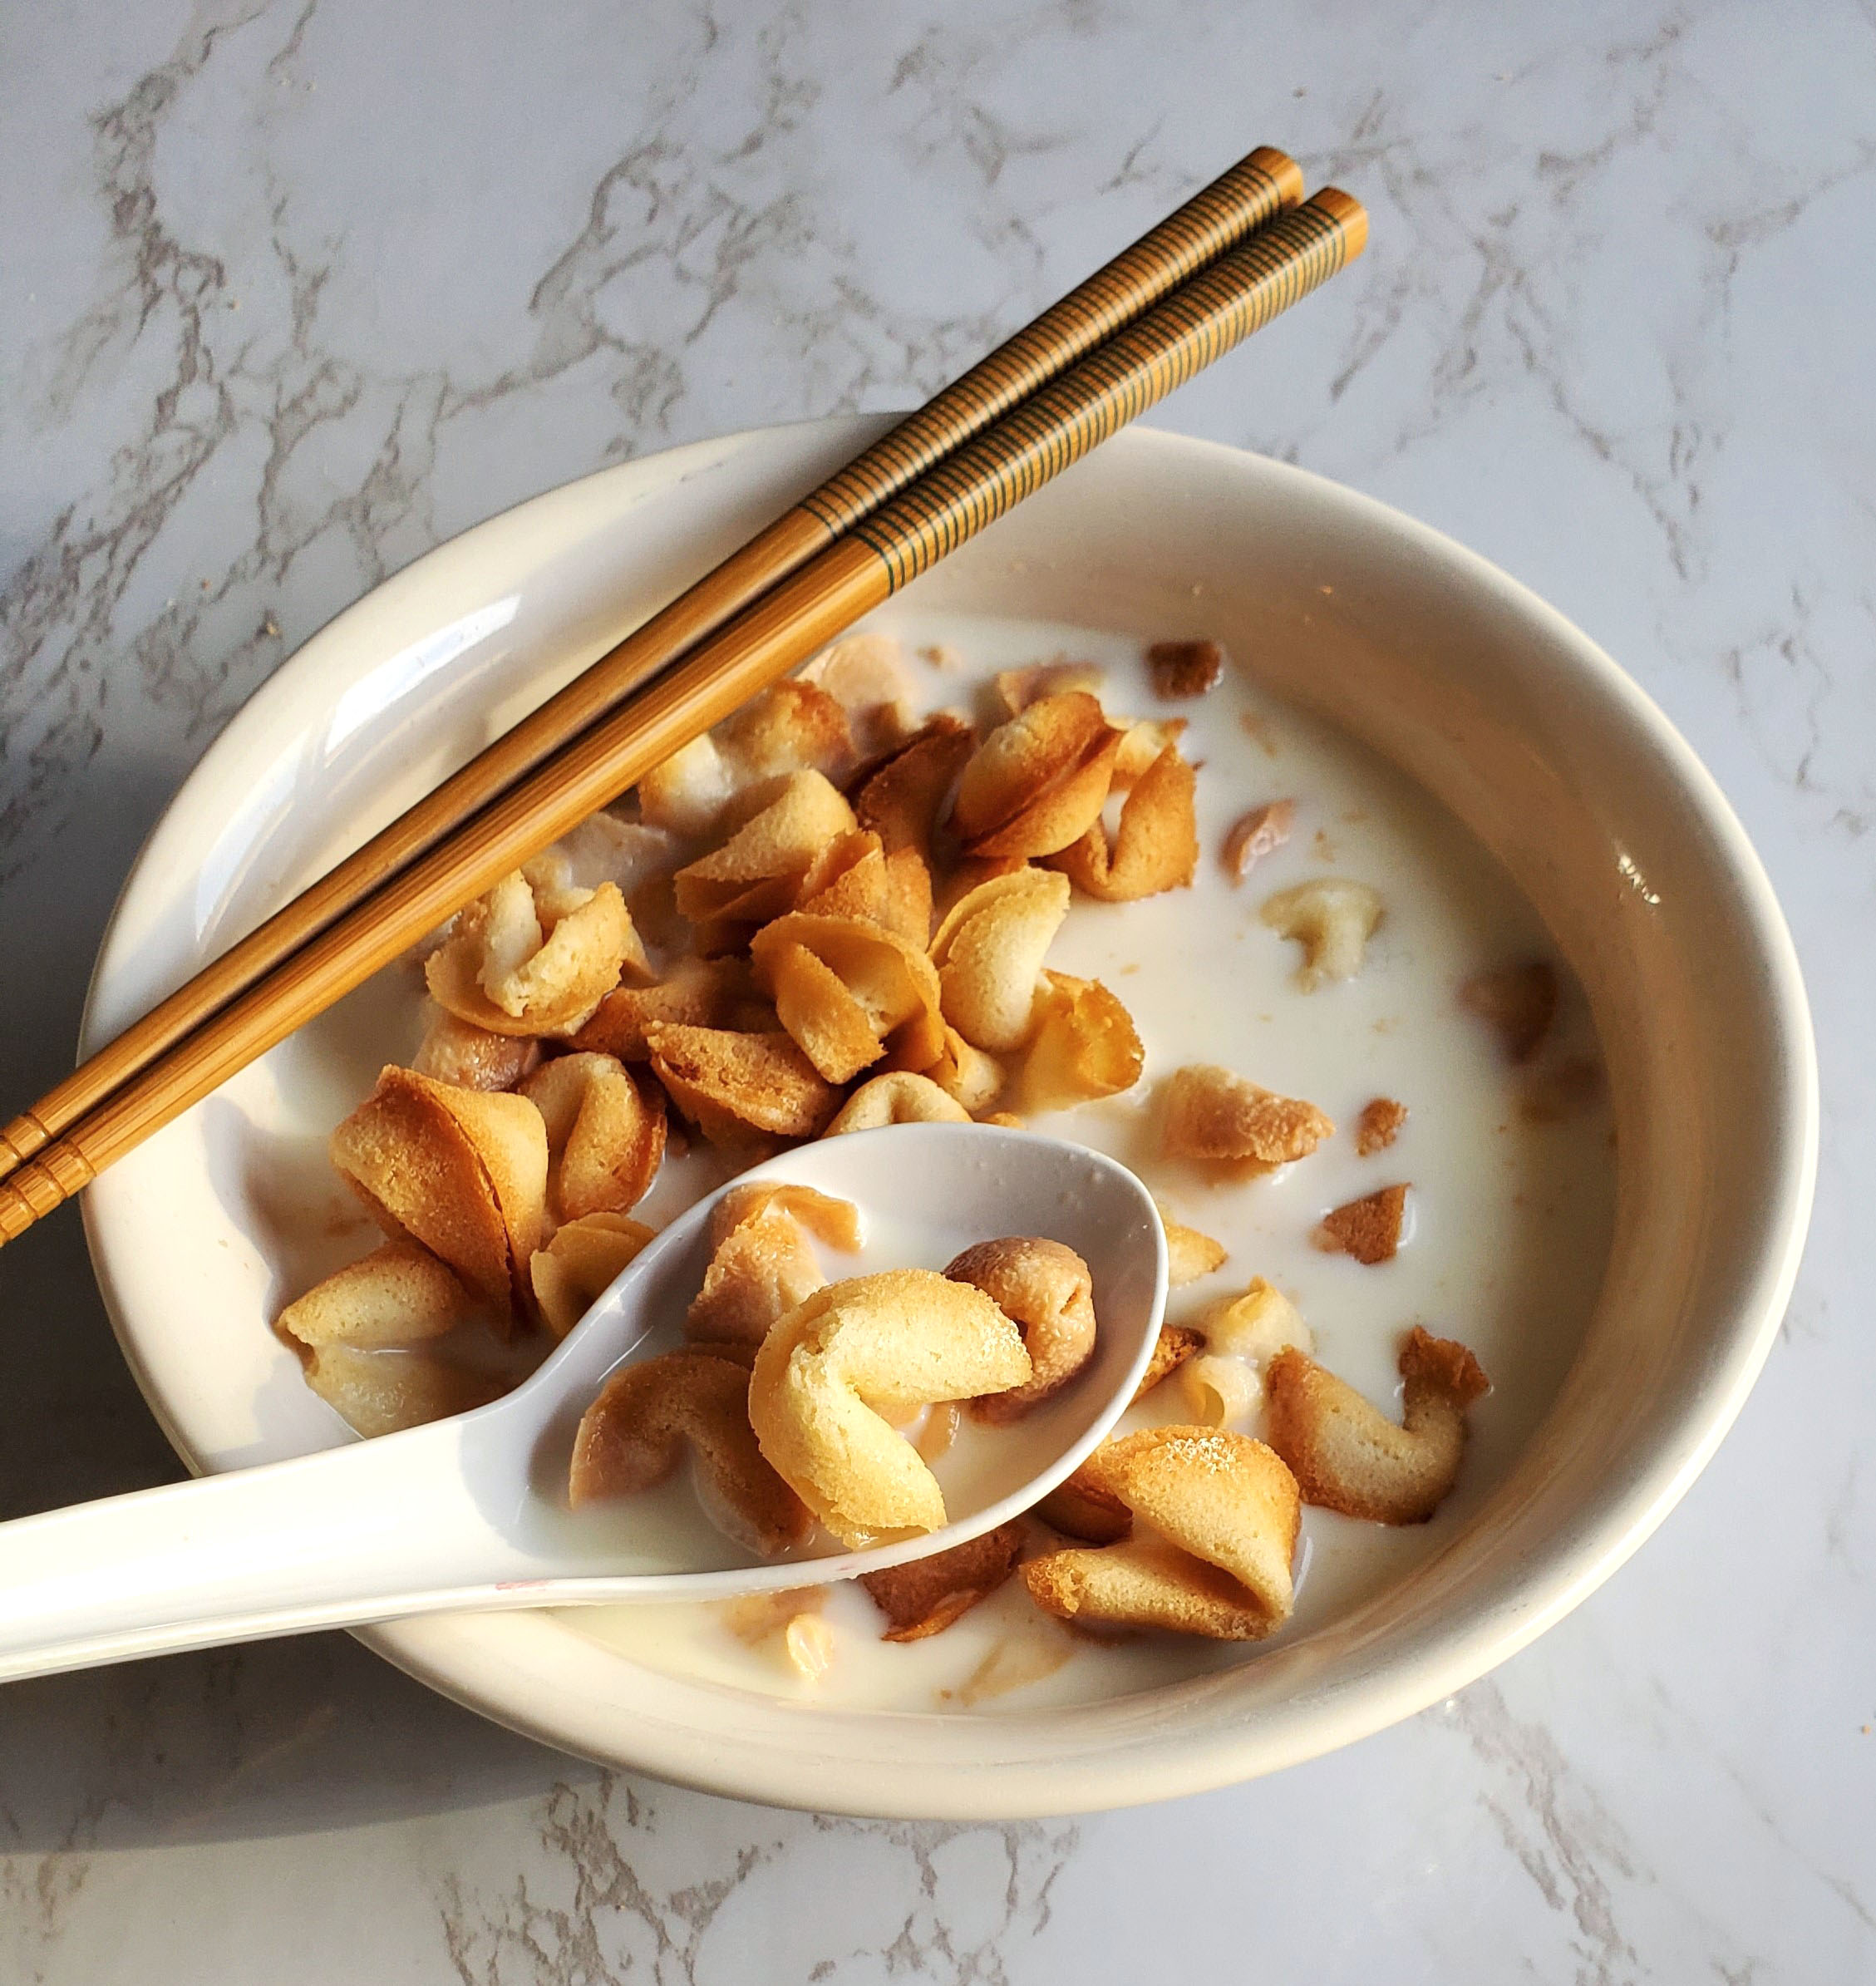 There is a white bowl, filled with milk and many tiny fortune cookies. Inside is a bowl filled with a scoop full of the cookies. Chopsticks with a green lined pattern rest diagonally on the upper left hand side of the bowl. The bowl sits on a white countertop.